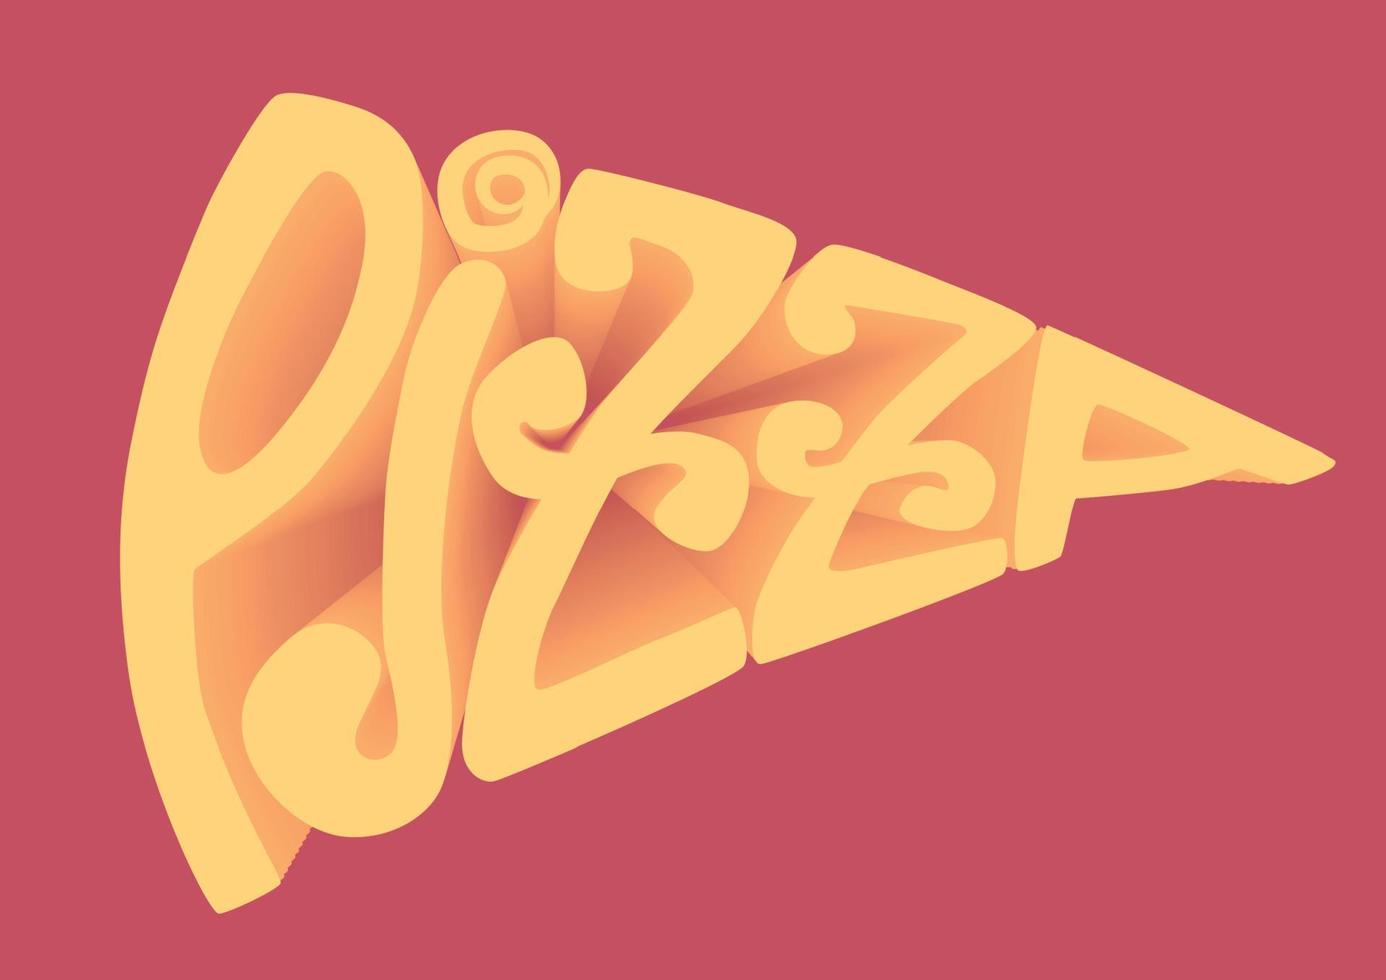 Pizza 3d lettering. Pizza logo template. Vector emblem for a cafe, restaurant or food delivery service.